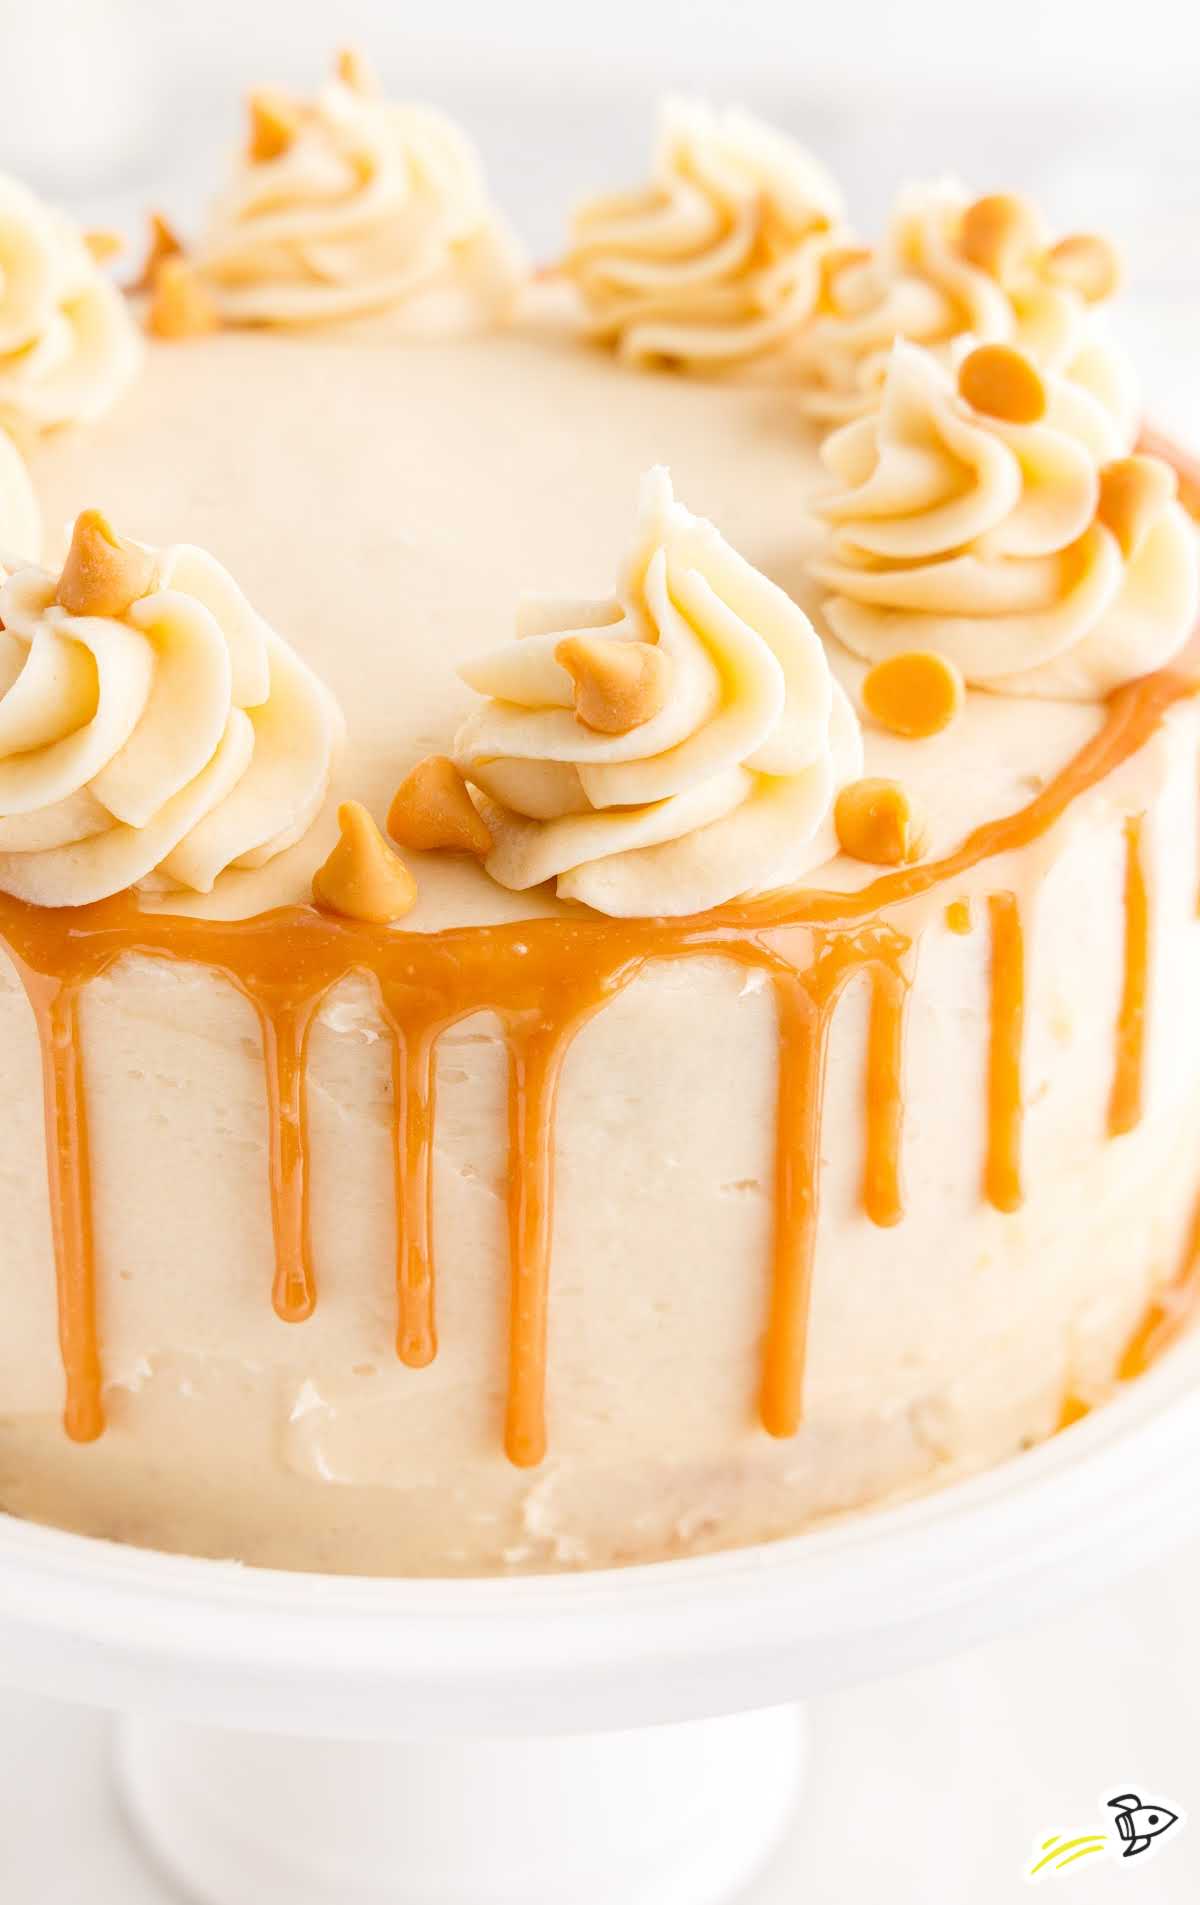 cake topped with whipped cream and caramel sauce on a cake stand